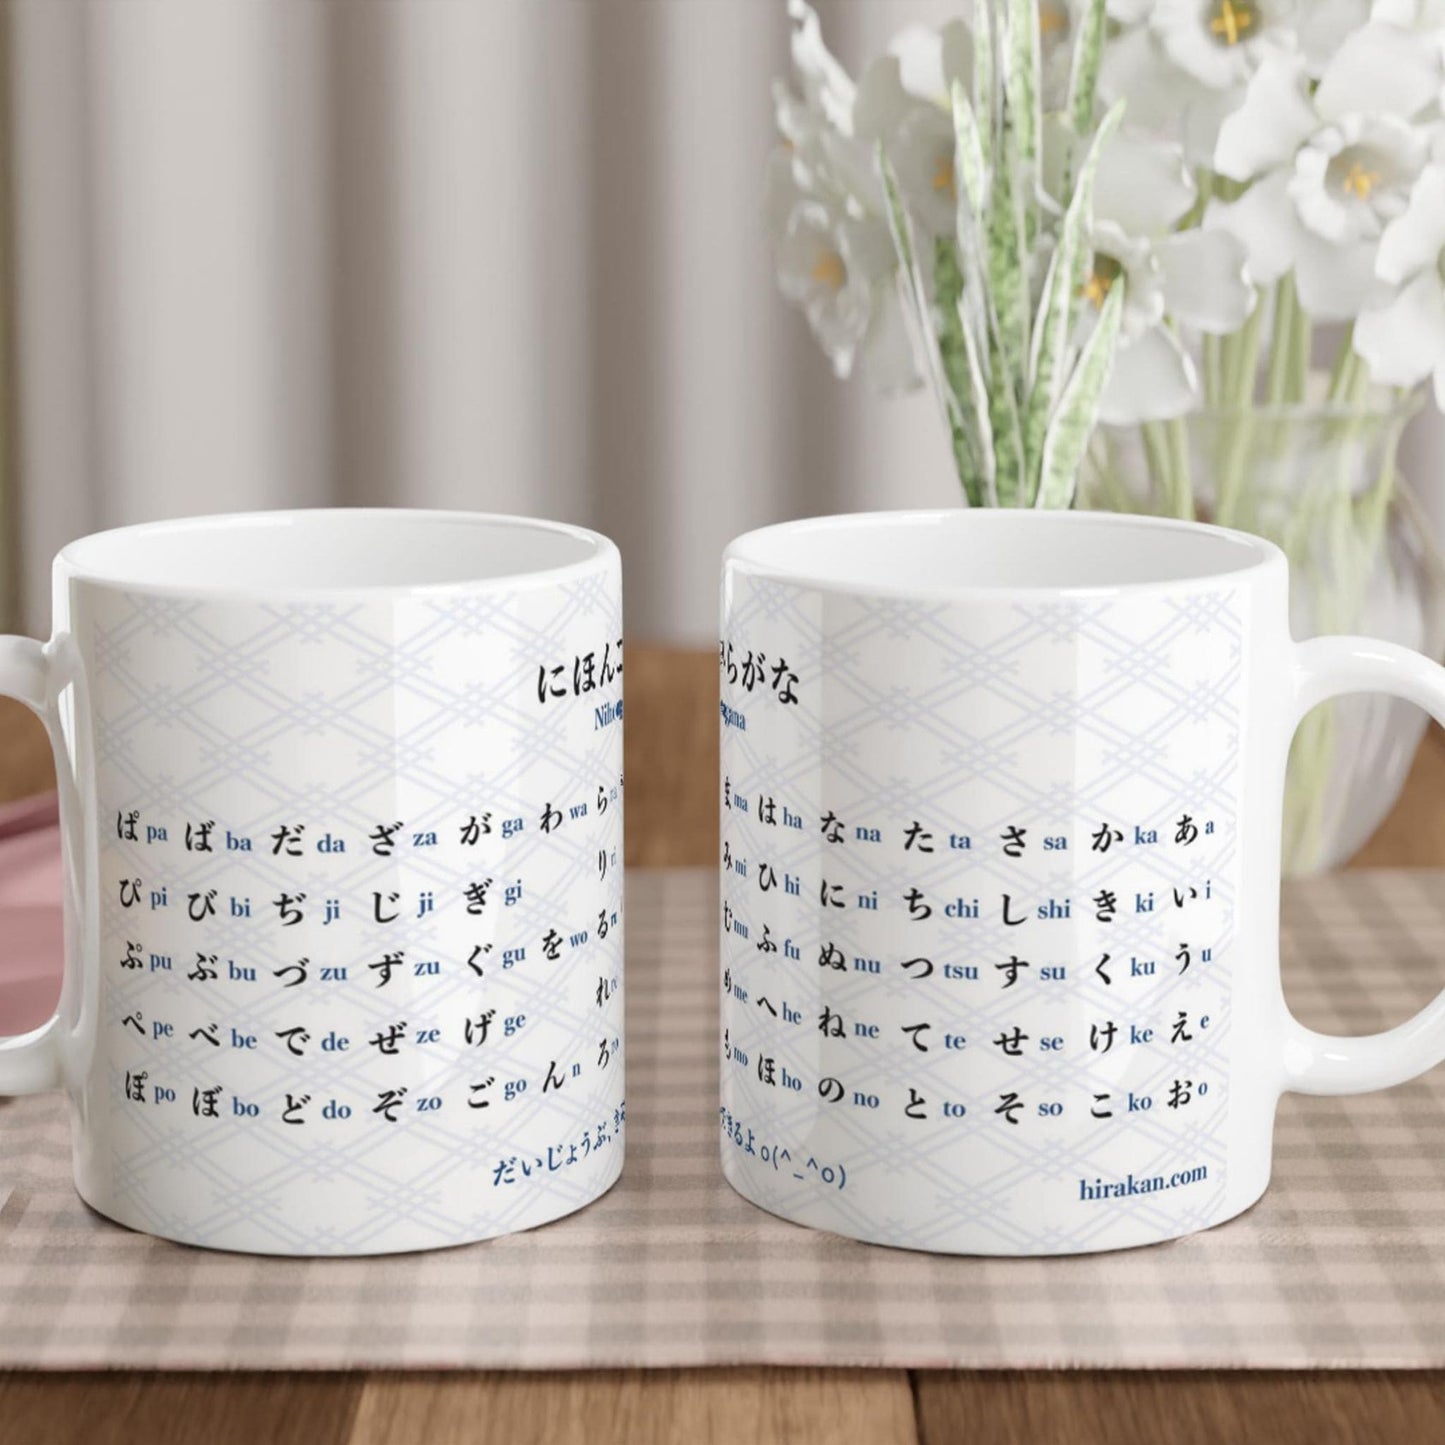 Two mugs with hiragana chart print for Japanese language learning facing each other on a table